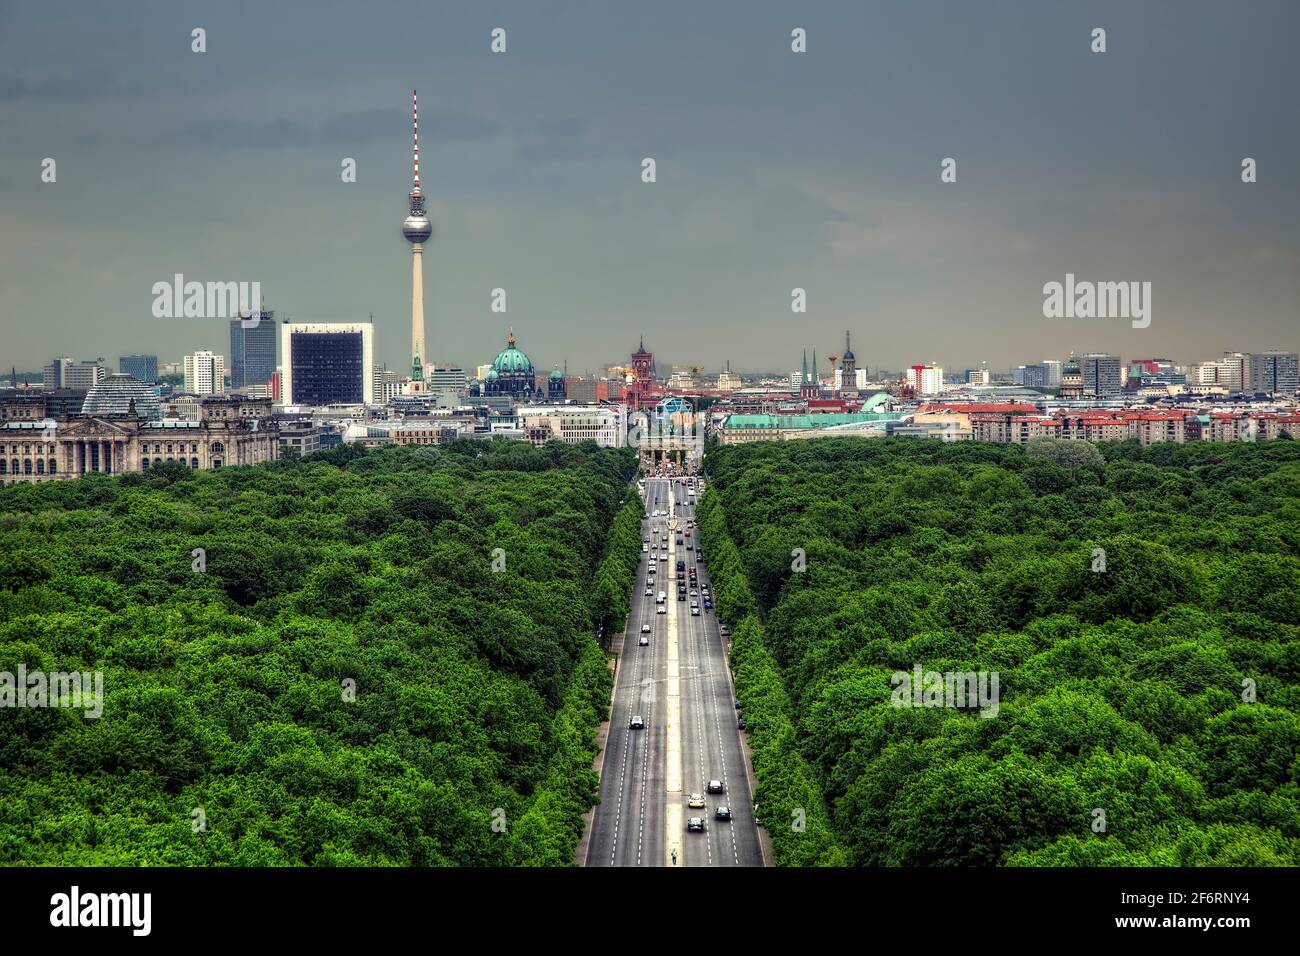 The view towards the Brandenburg Gate from the top of the Victory Column in Tiergarten, Berlin. Stock Photo